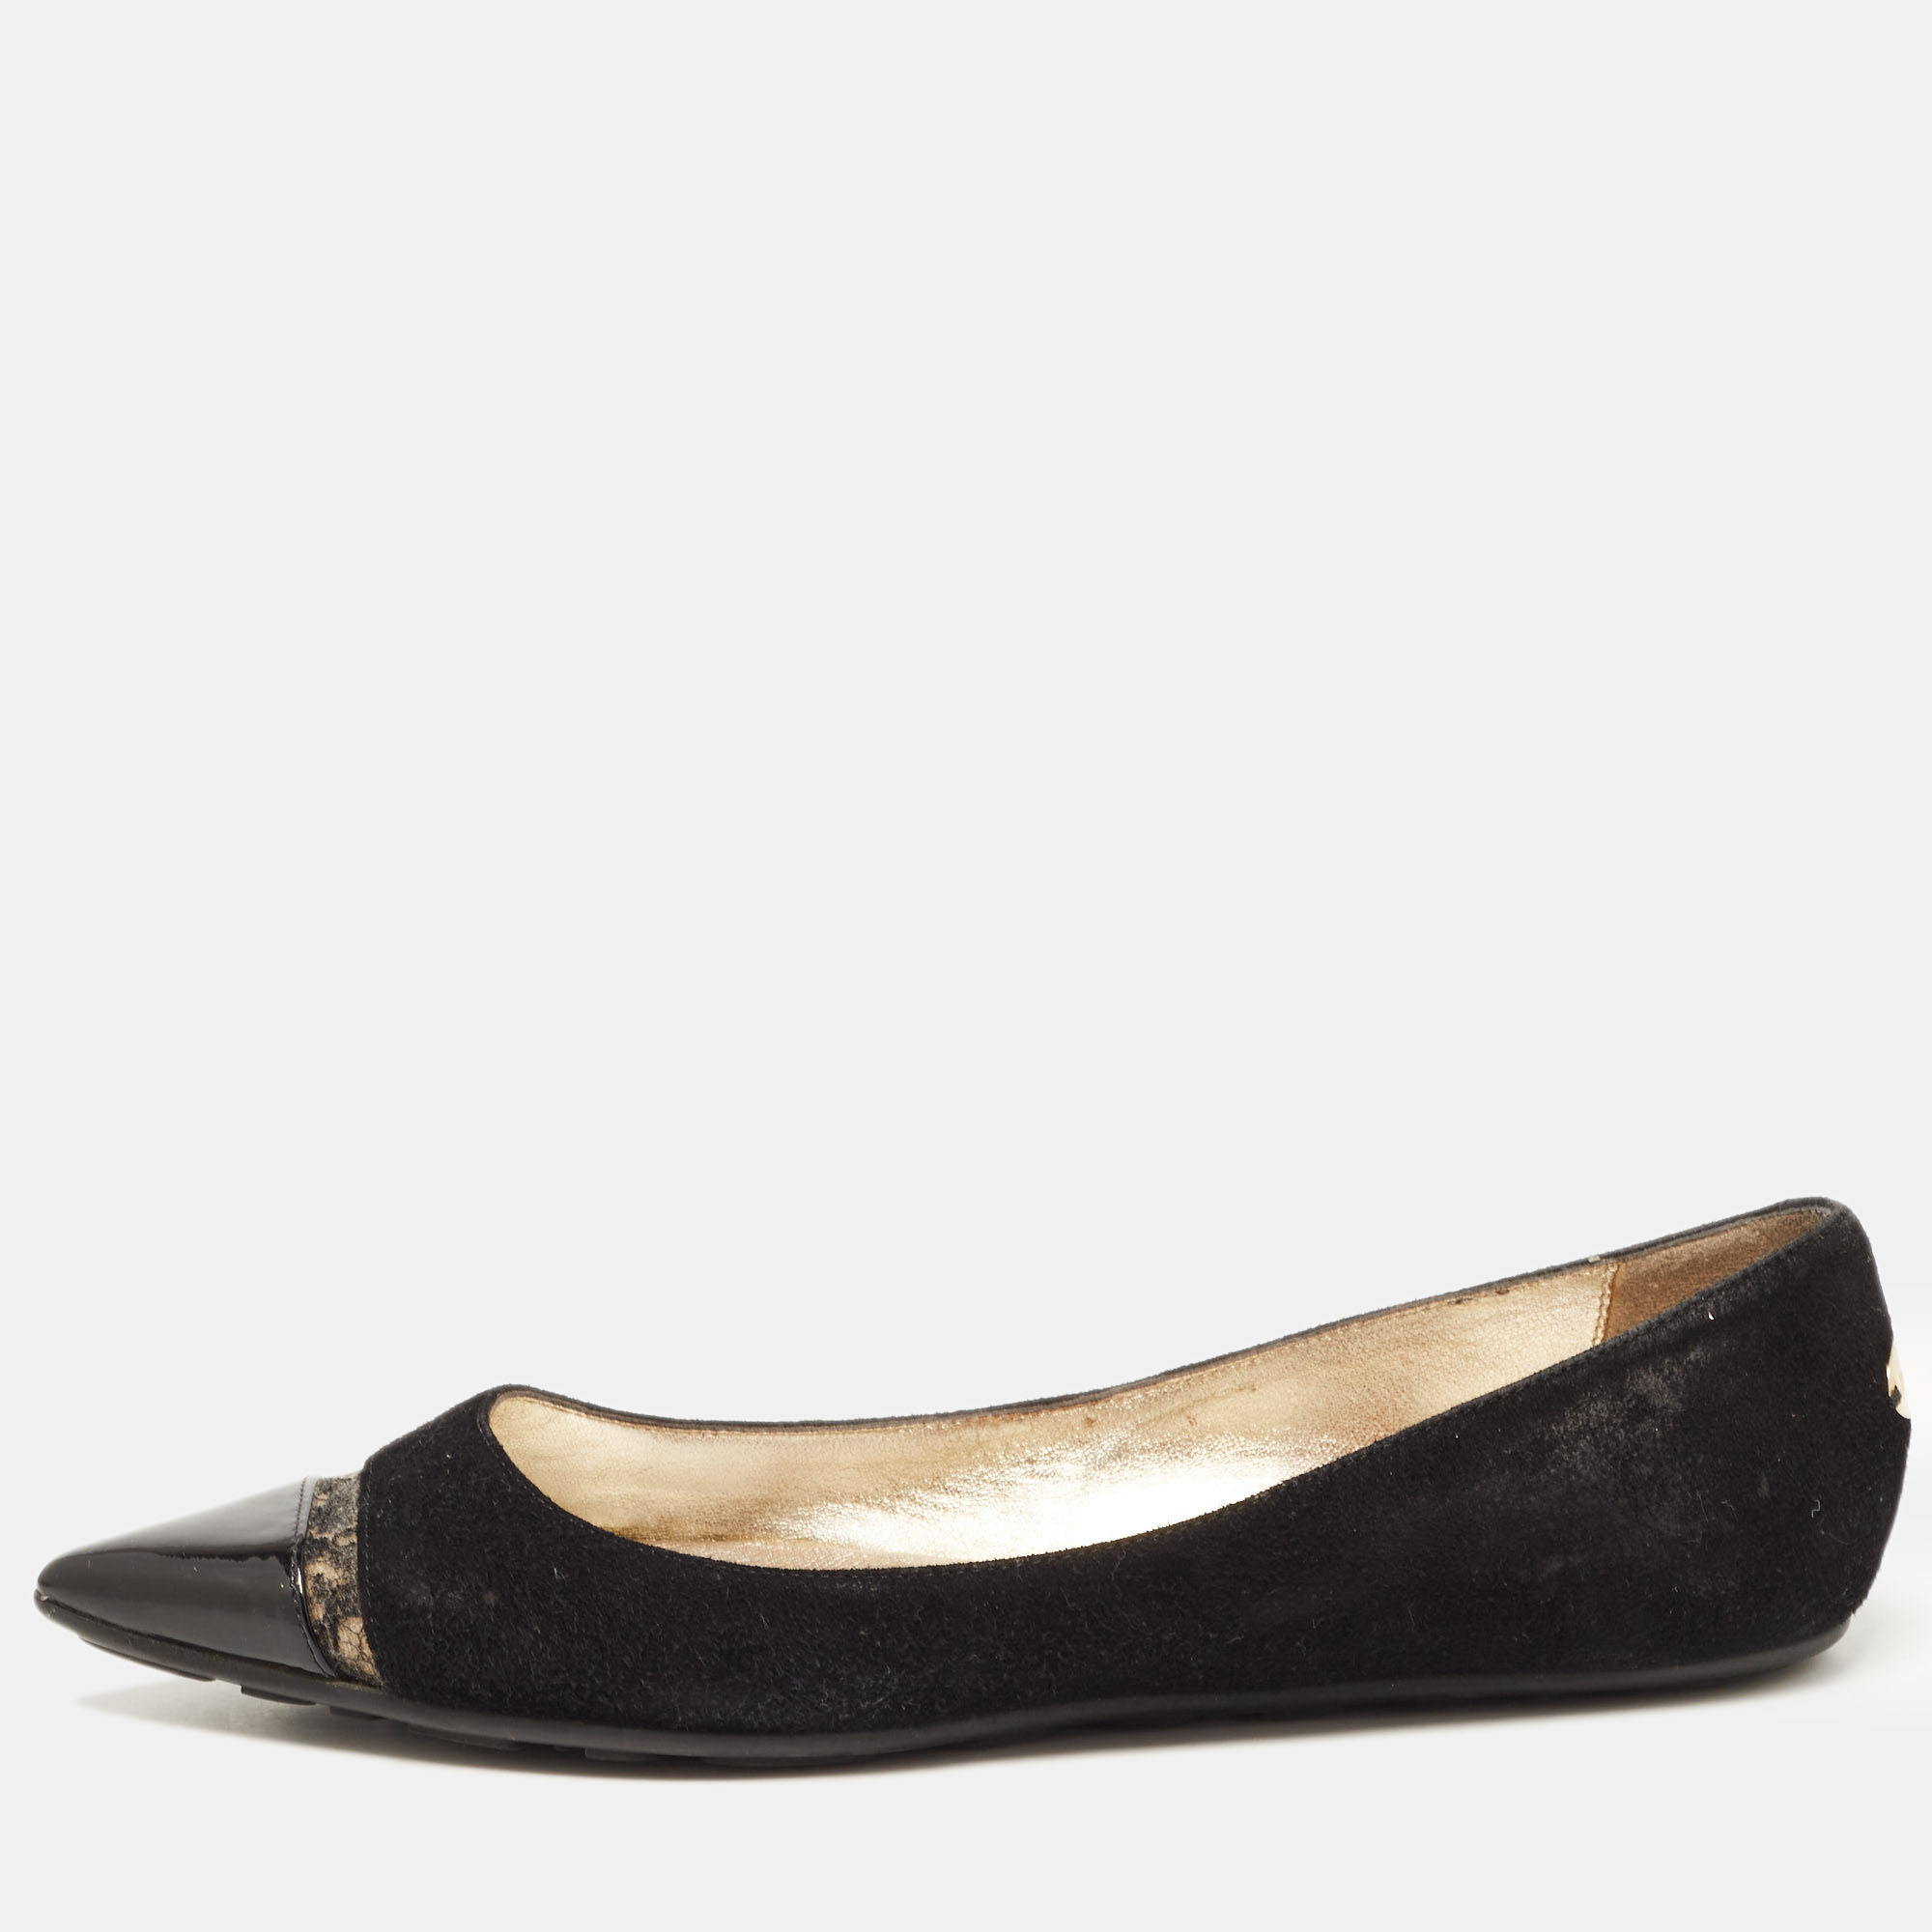 

Jimmy Choo Black Suede and Patent Leather Ballet Flats Size